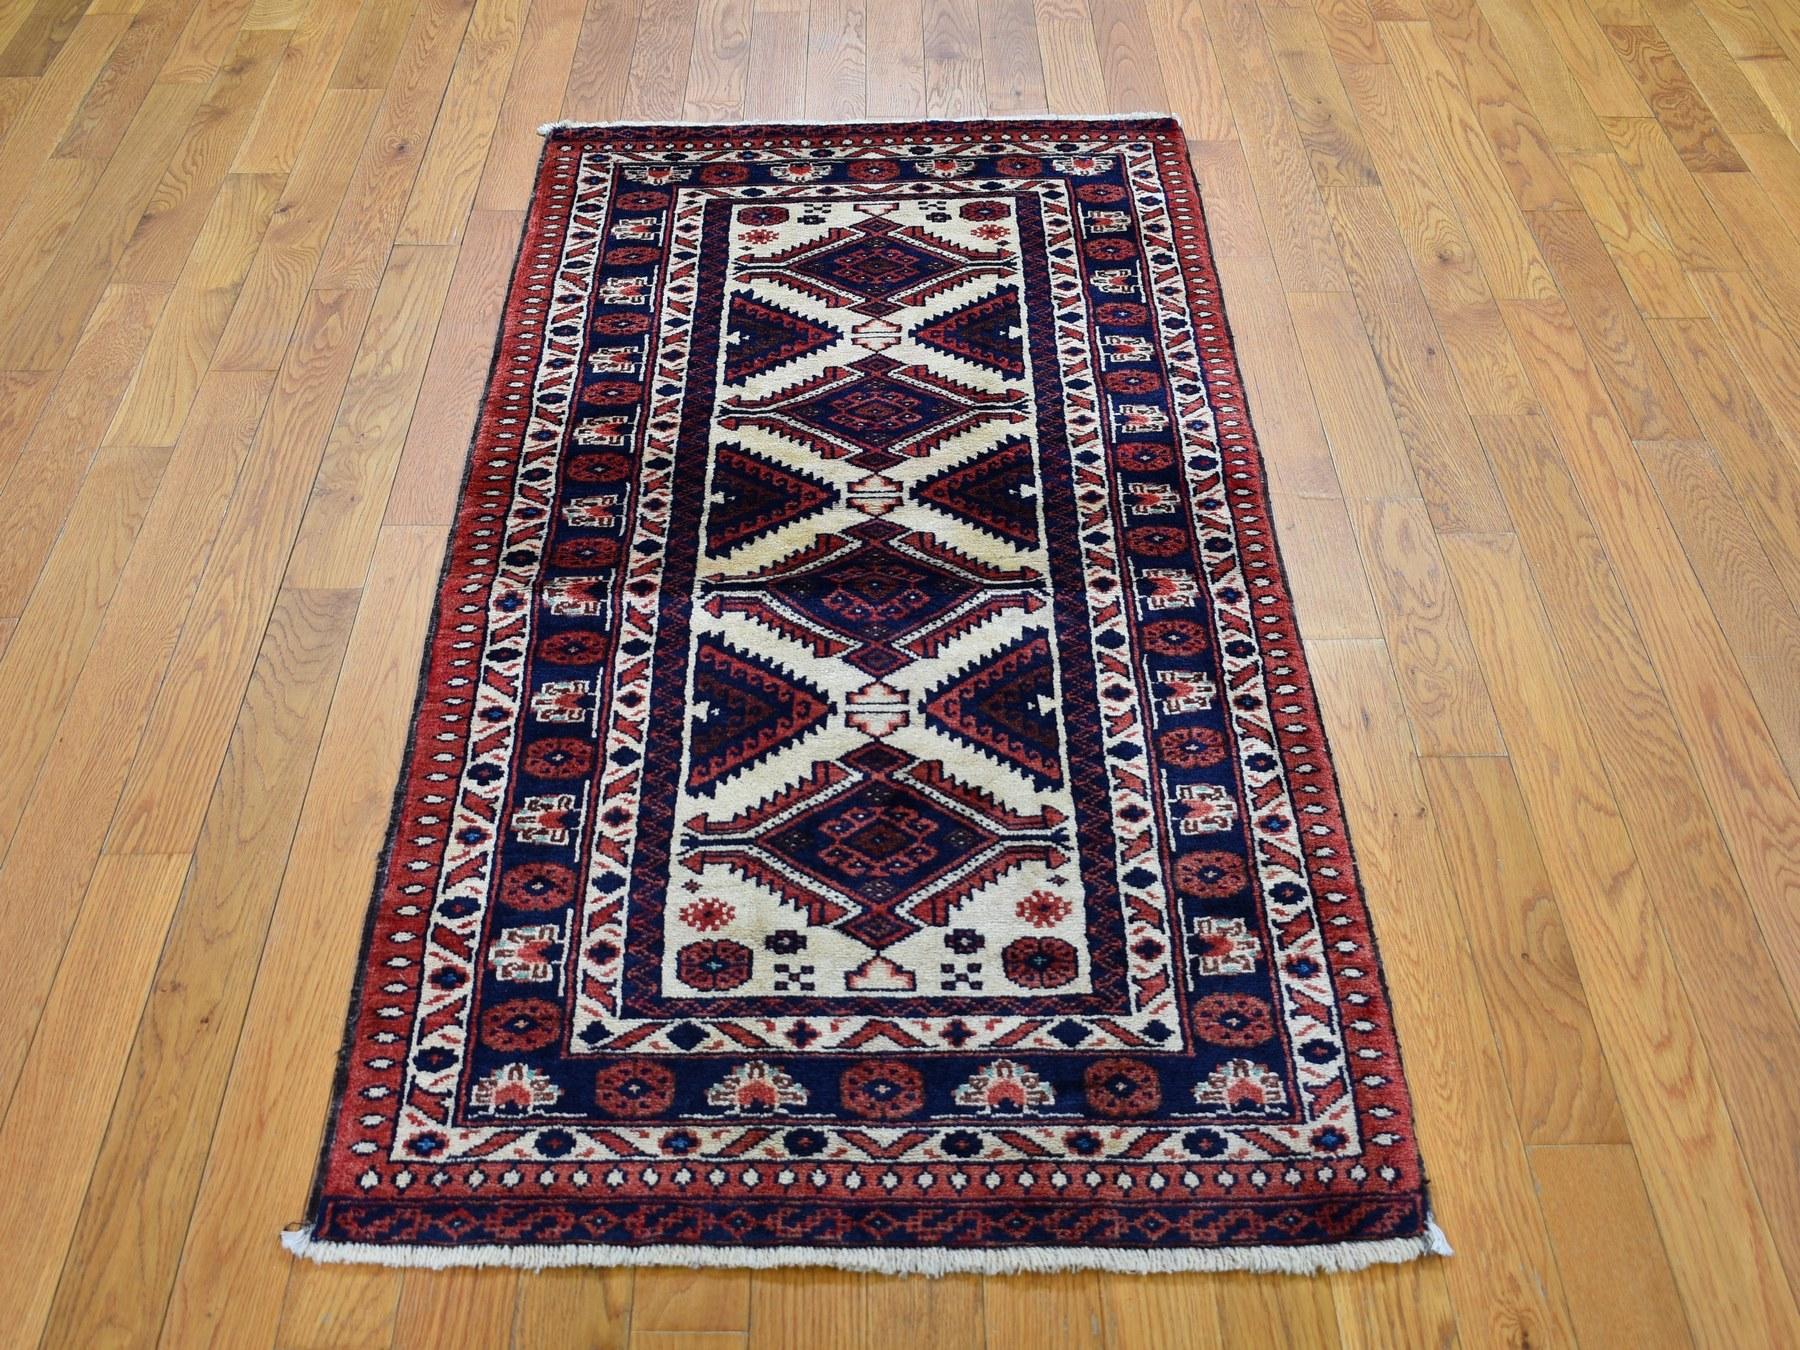 This fabulous hand knotted carpet has been created and designed for extra strength and durability. This rug has been handcrafted for weeks in the traditional method that is used to make Rugs. This is truly a one-of-kind piece. 

Exact Rug Size in